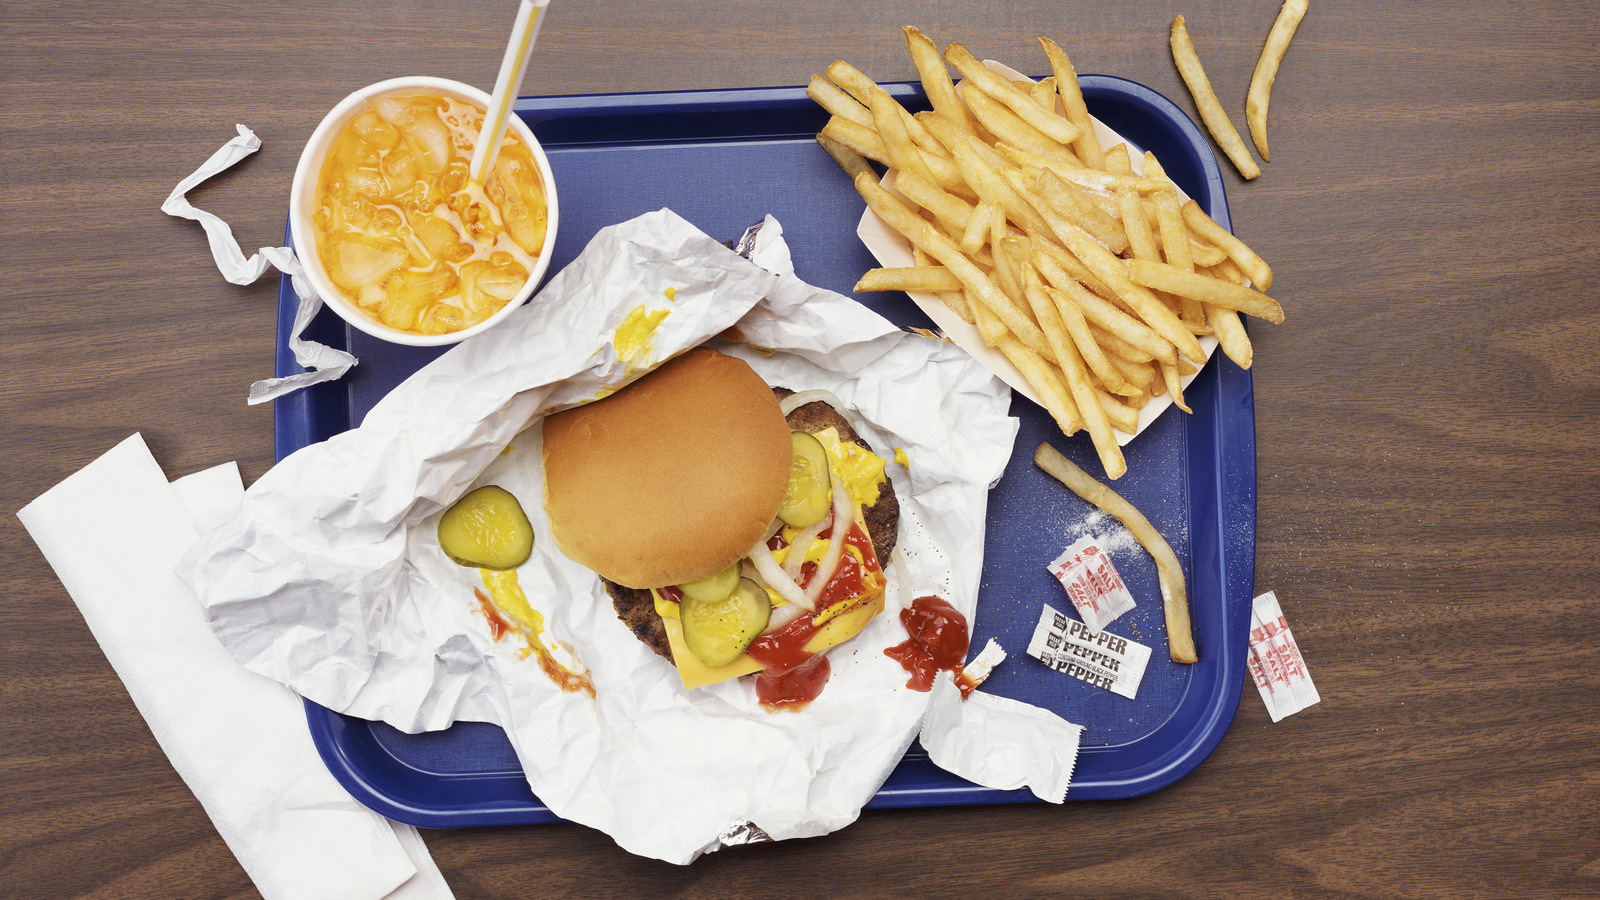 Focus: U.S. fast-food chains cut discounts, push pricy meals post-pandemic